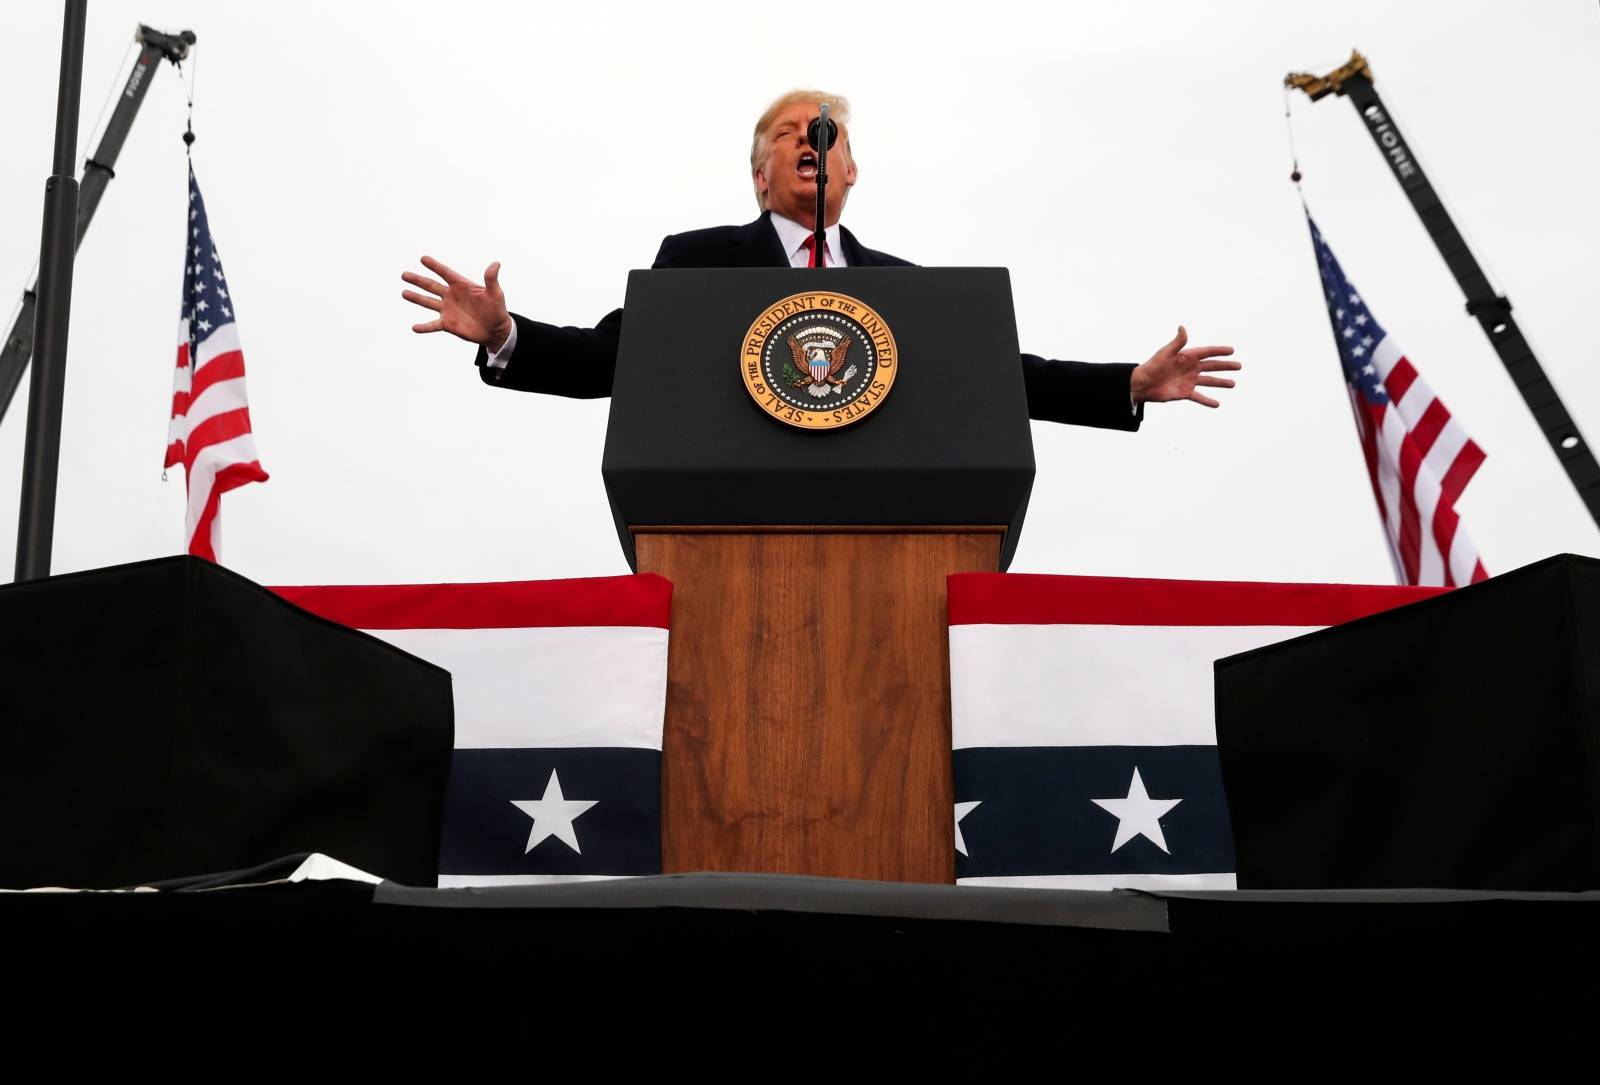 U.S. President Donald Trump holds a campaign event in Martinsburg, Pennsylvania